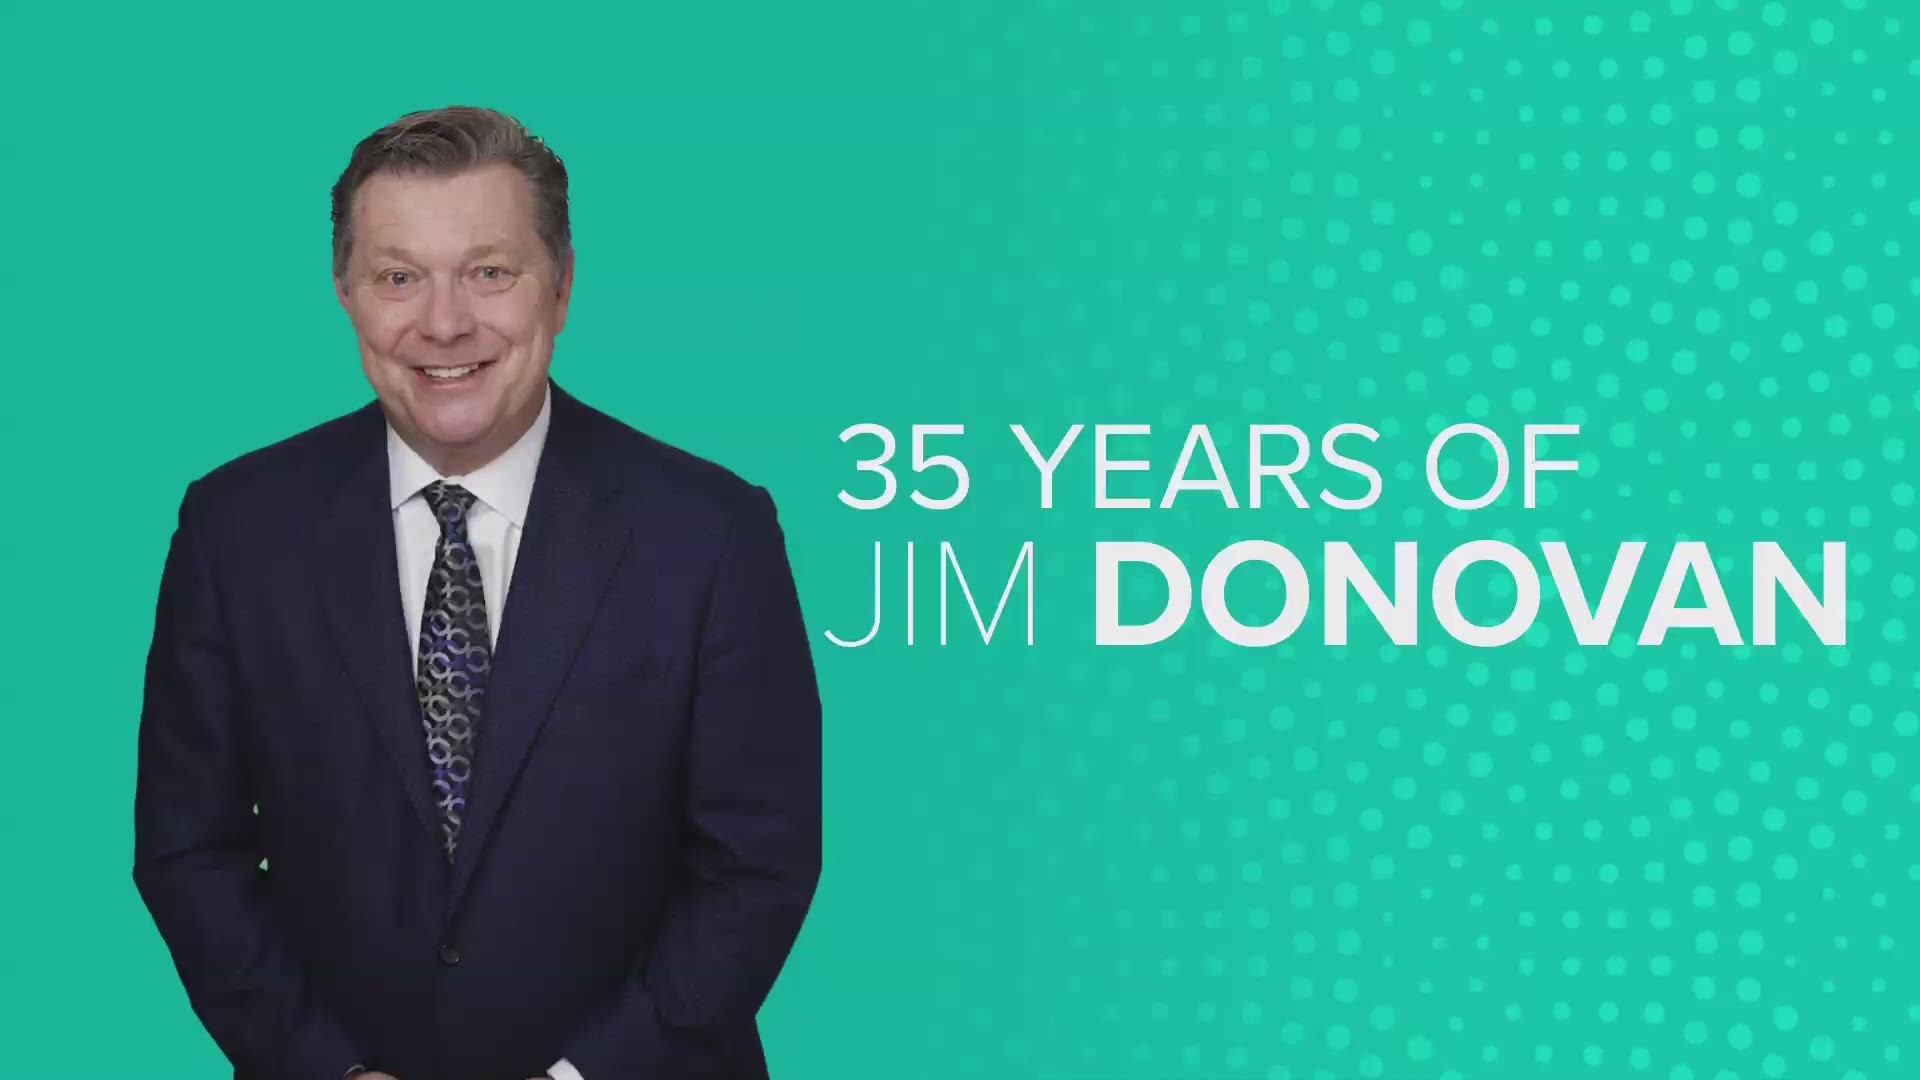 Jim Donovan looks back at the moments that shaped his career here in Cleveland.  Congratulations on 35 years and counting, Jimmy!